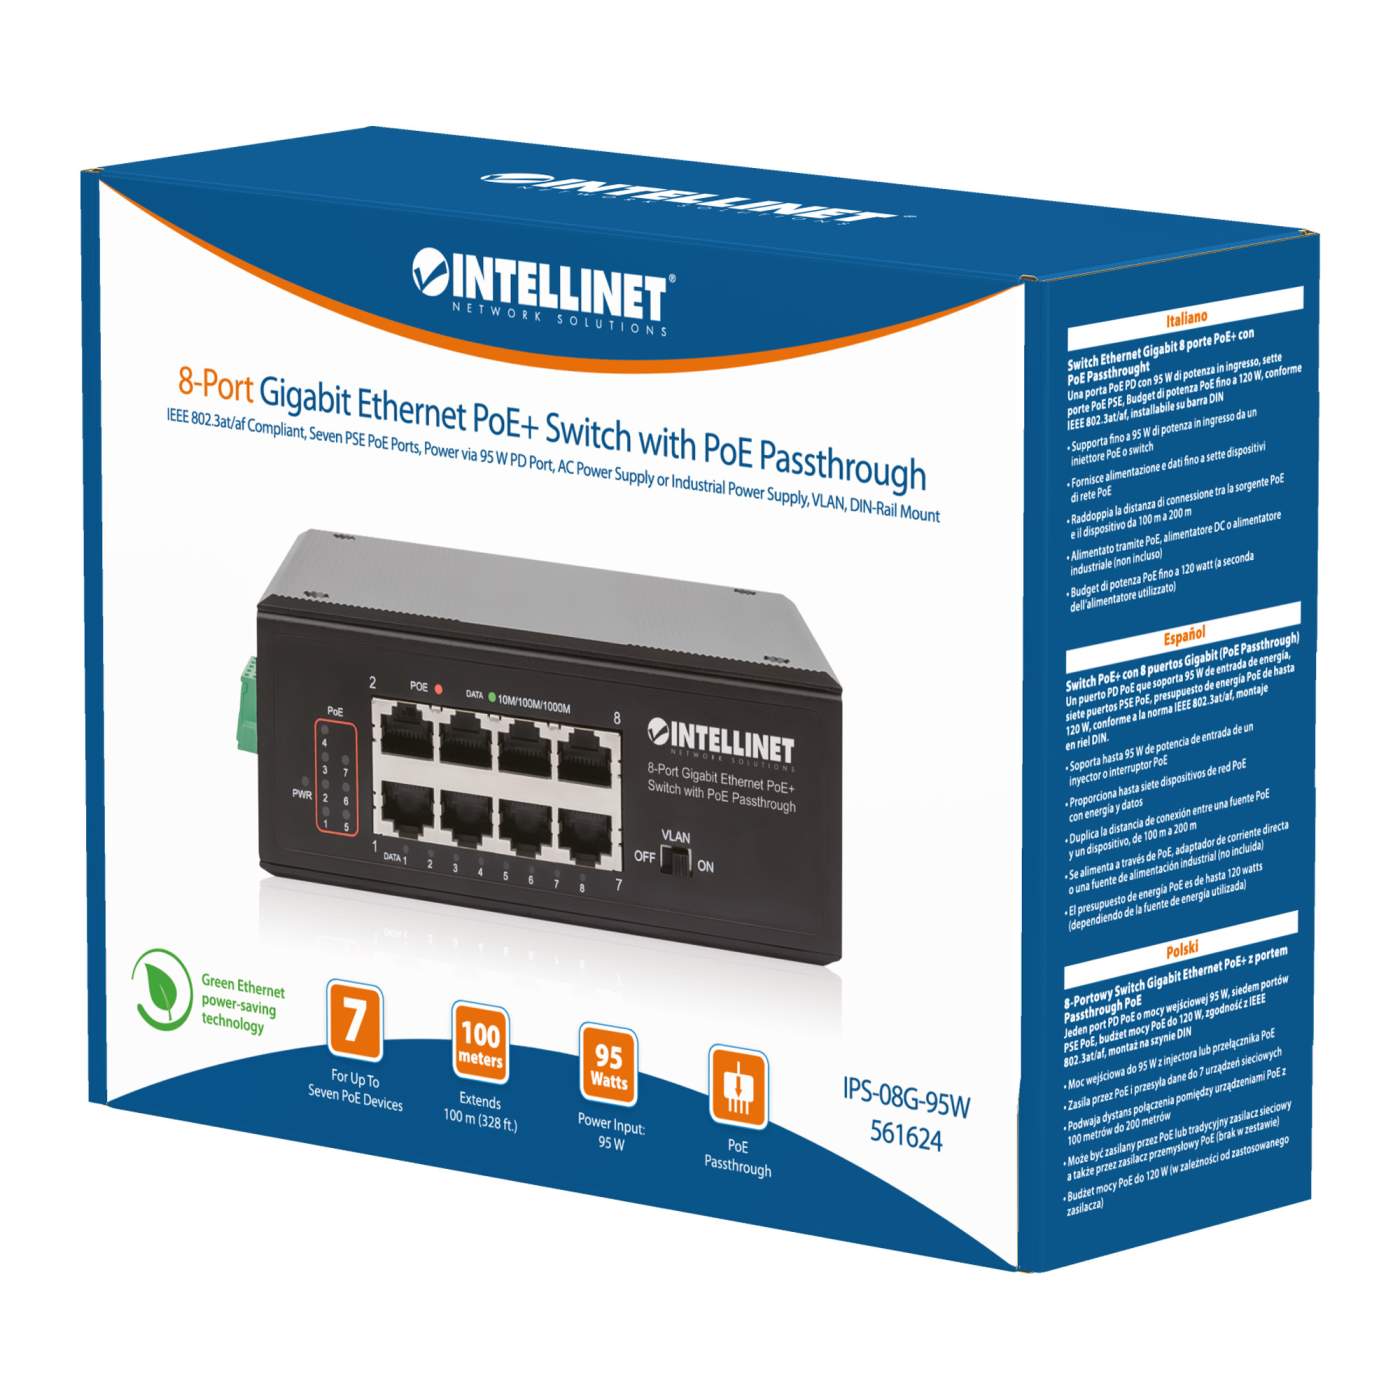 PoE-Powered 8-Port Gigabit Ethernet PoE+ Industrial Switch with PoE Passthrough Packaging Image 2